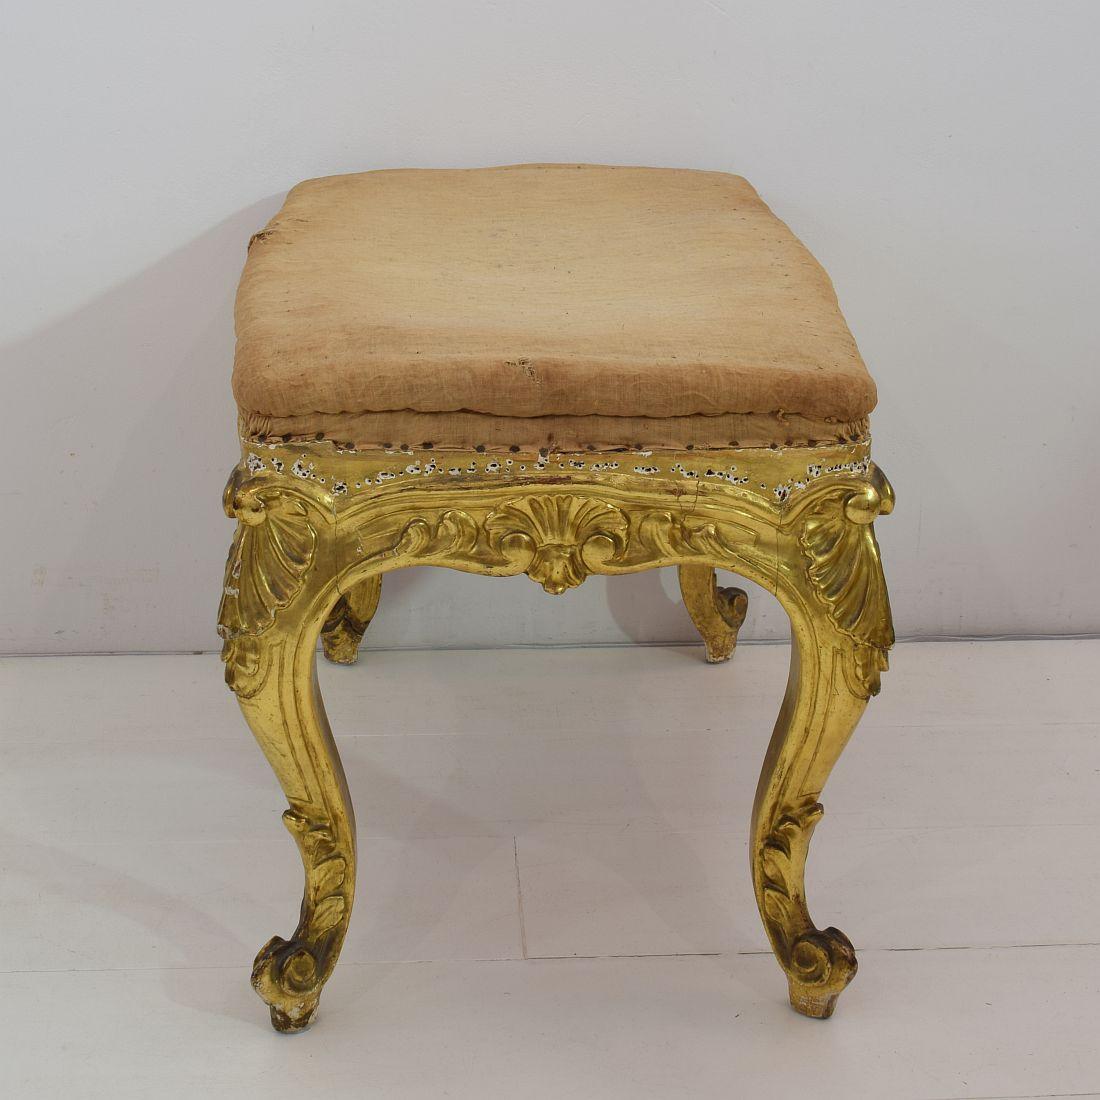 Wood 19th Century Spanish Gilded Louis XVI Style Carved Stool or Tabouret